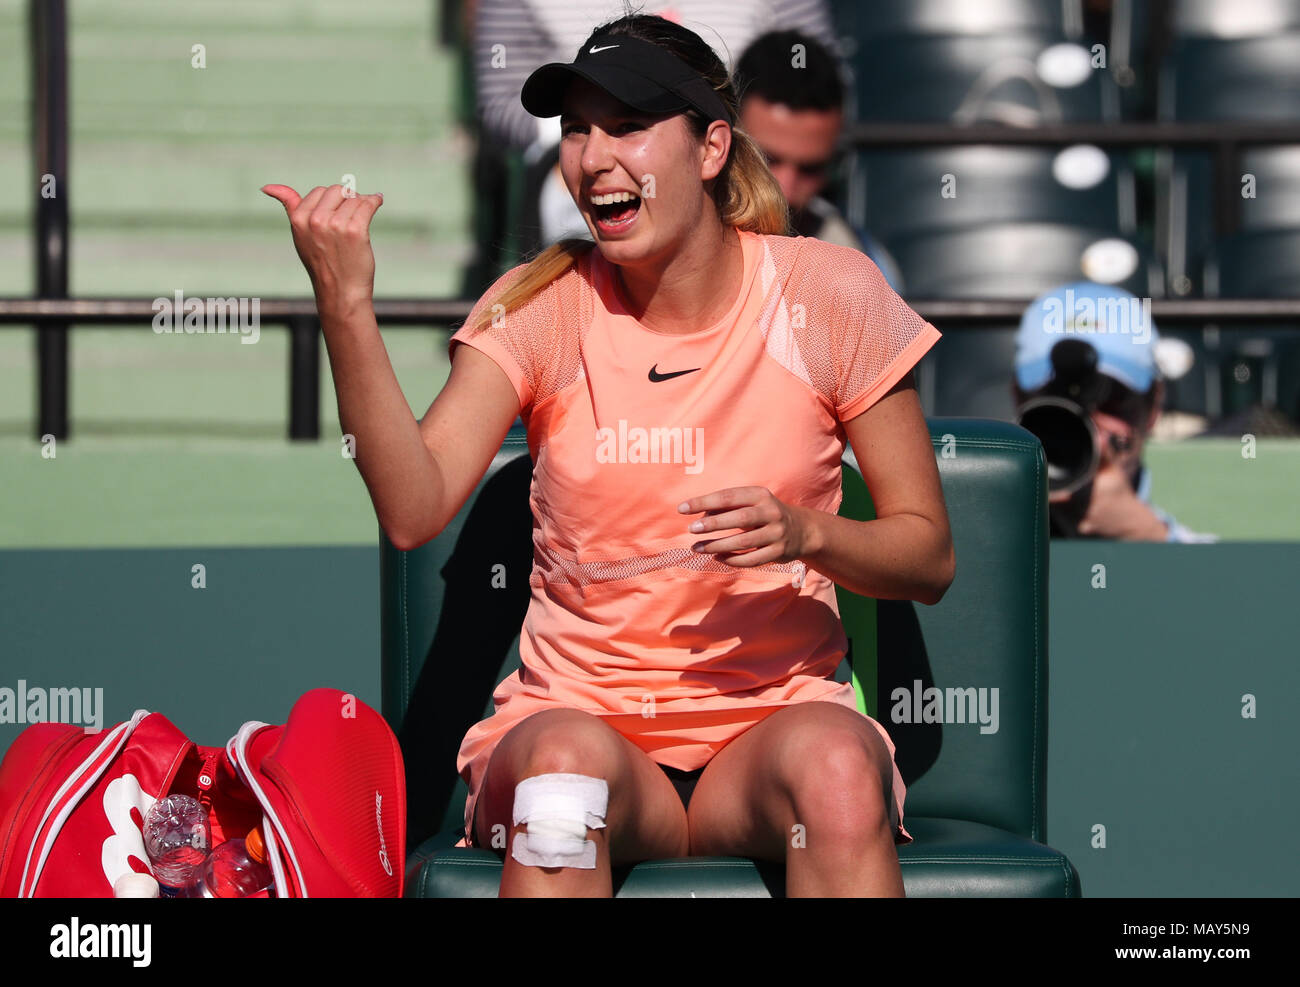 Key Biscayne, Florida, USA. 22nd Mar, 2018. Oceane Dodin from France makes  a request during a change of sides in an early round match against Simona  Halep from Romania at the 2018